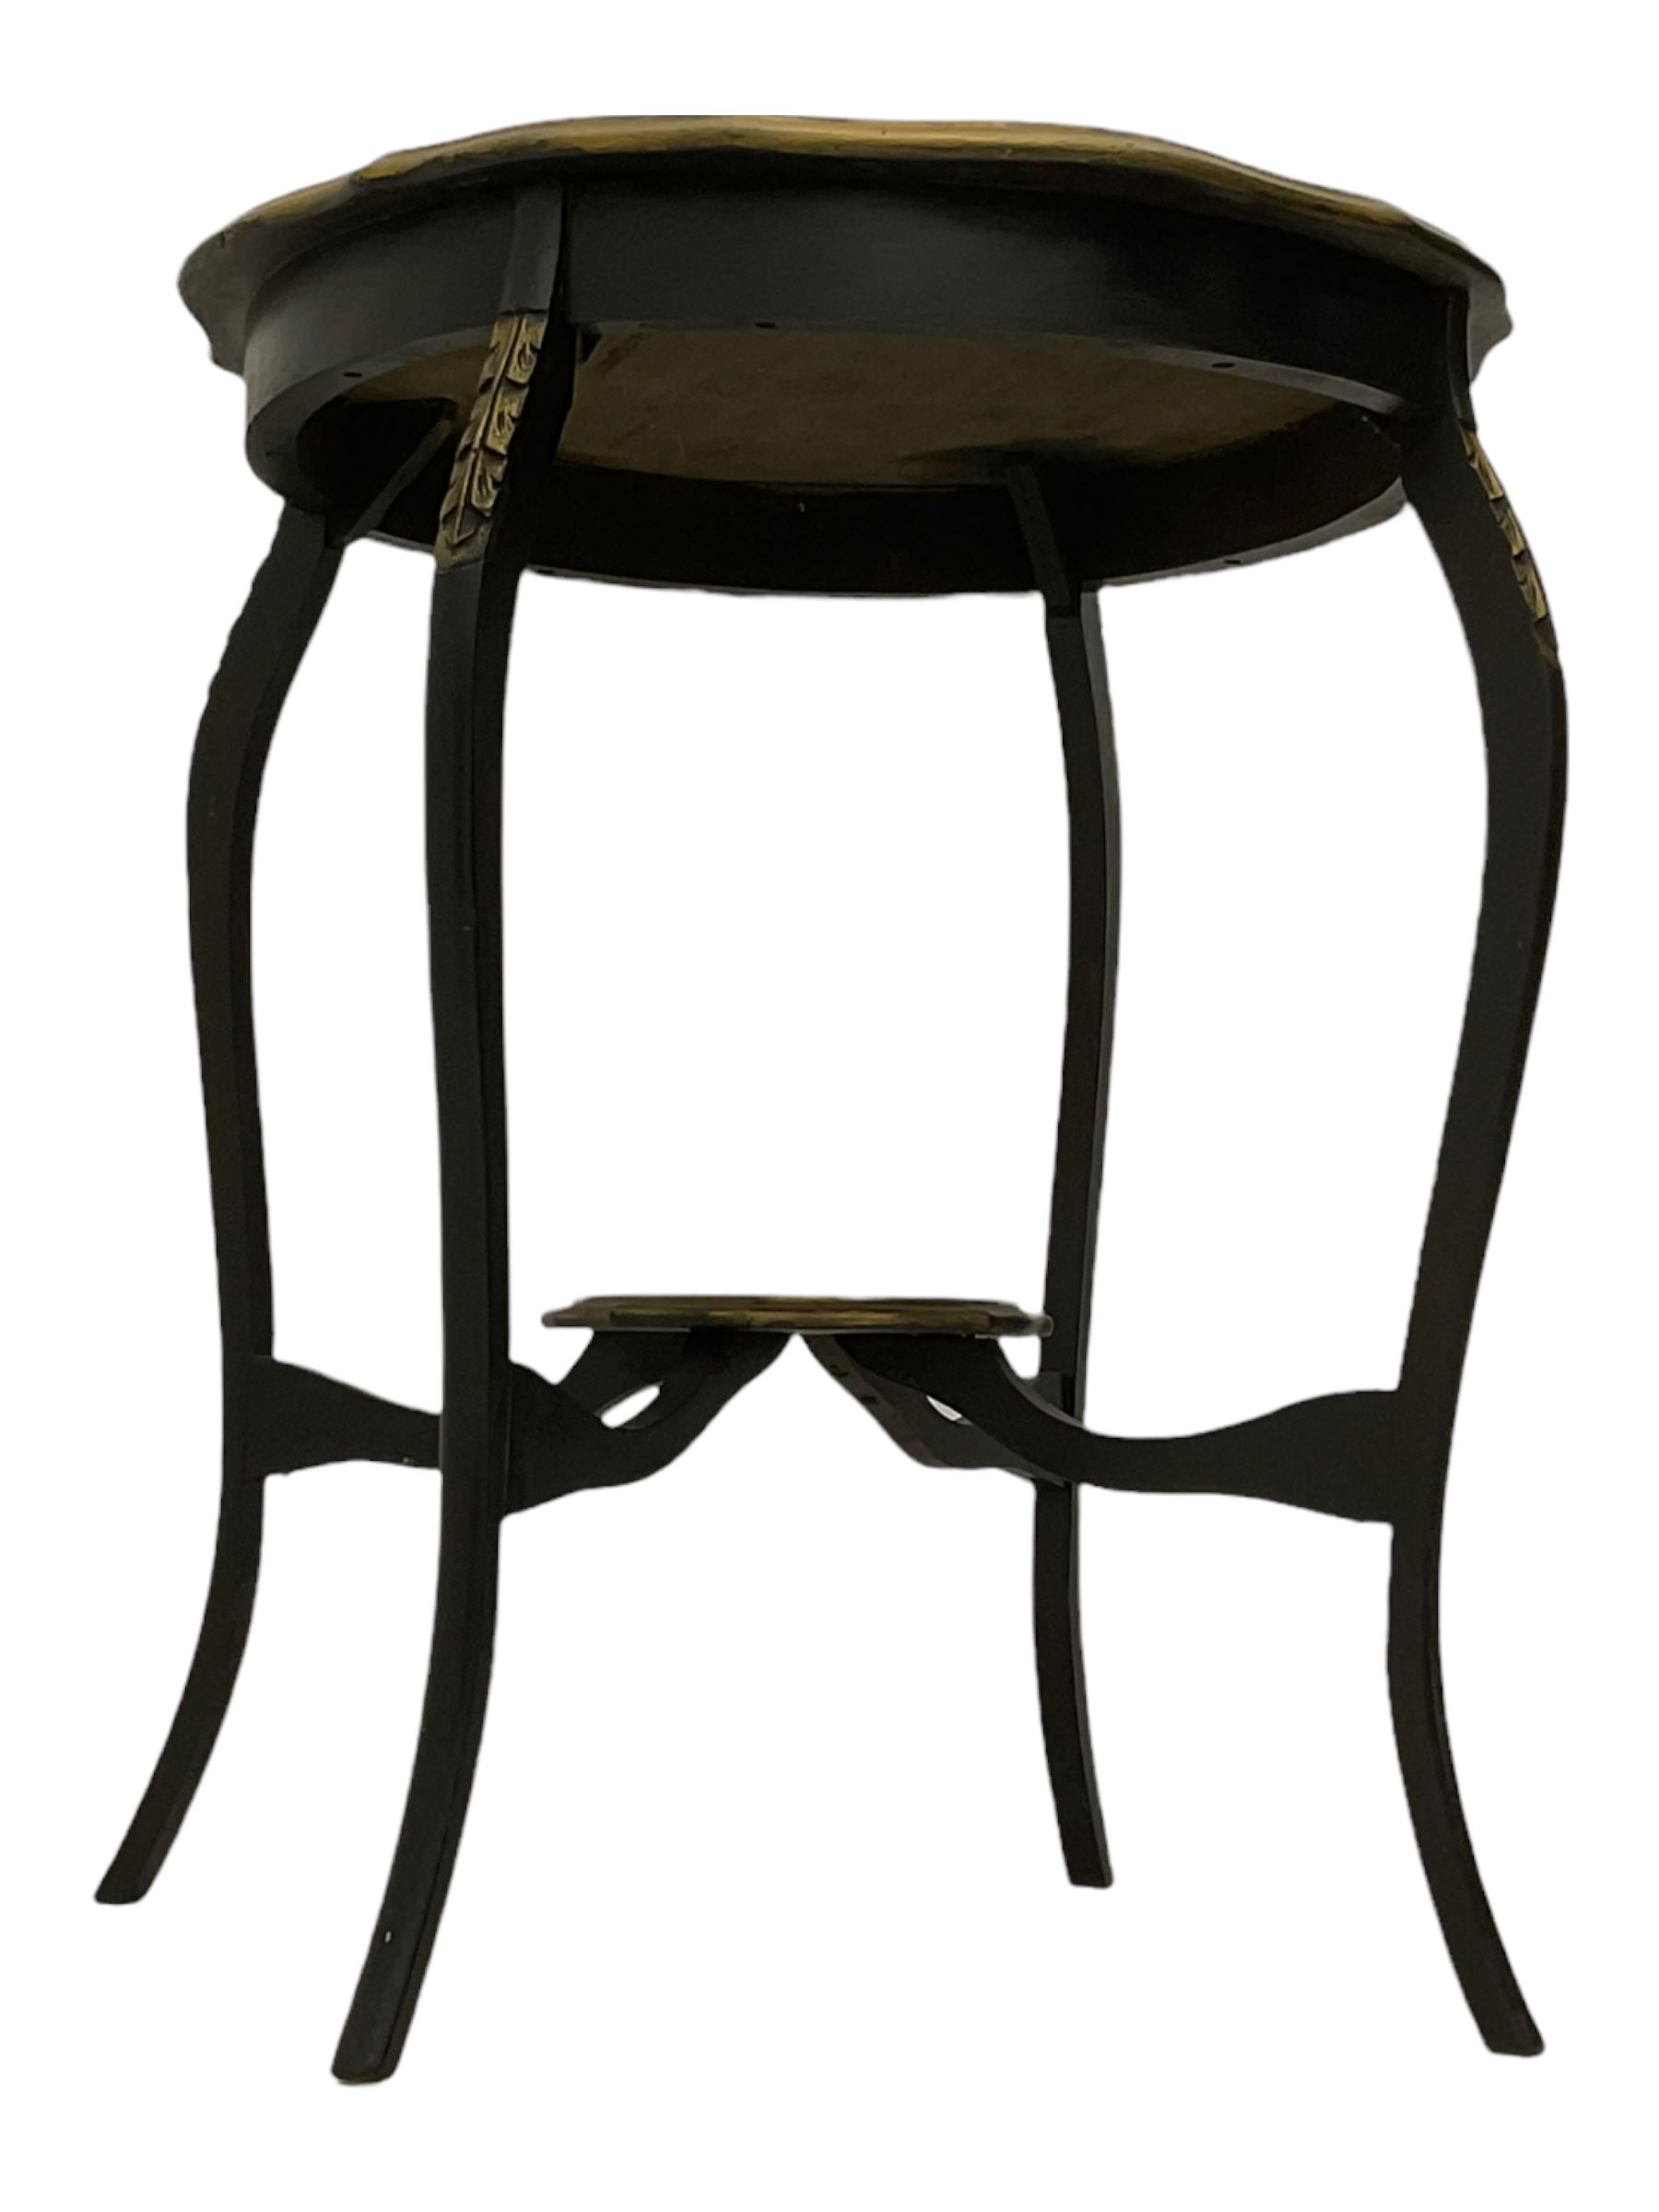 Early 20th century black painted and gilded centre table - Image 11 of 11